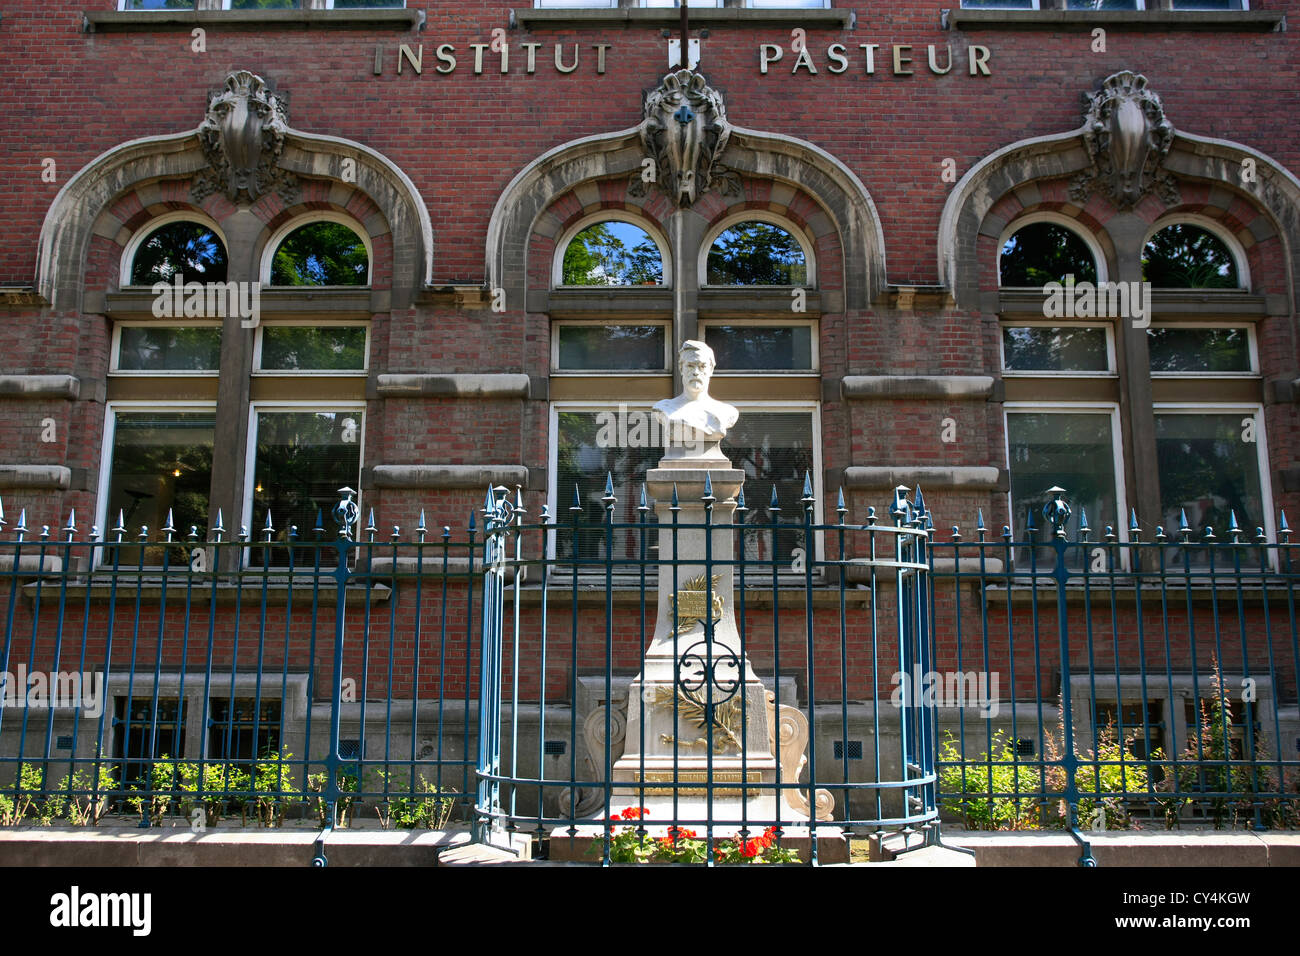 Institute pasteur hi-res stock photography and images - Alamy